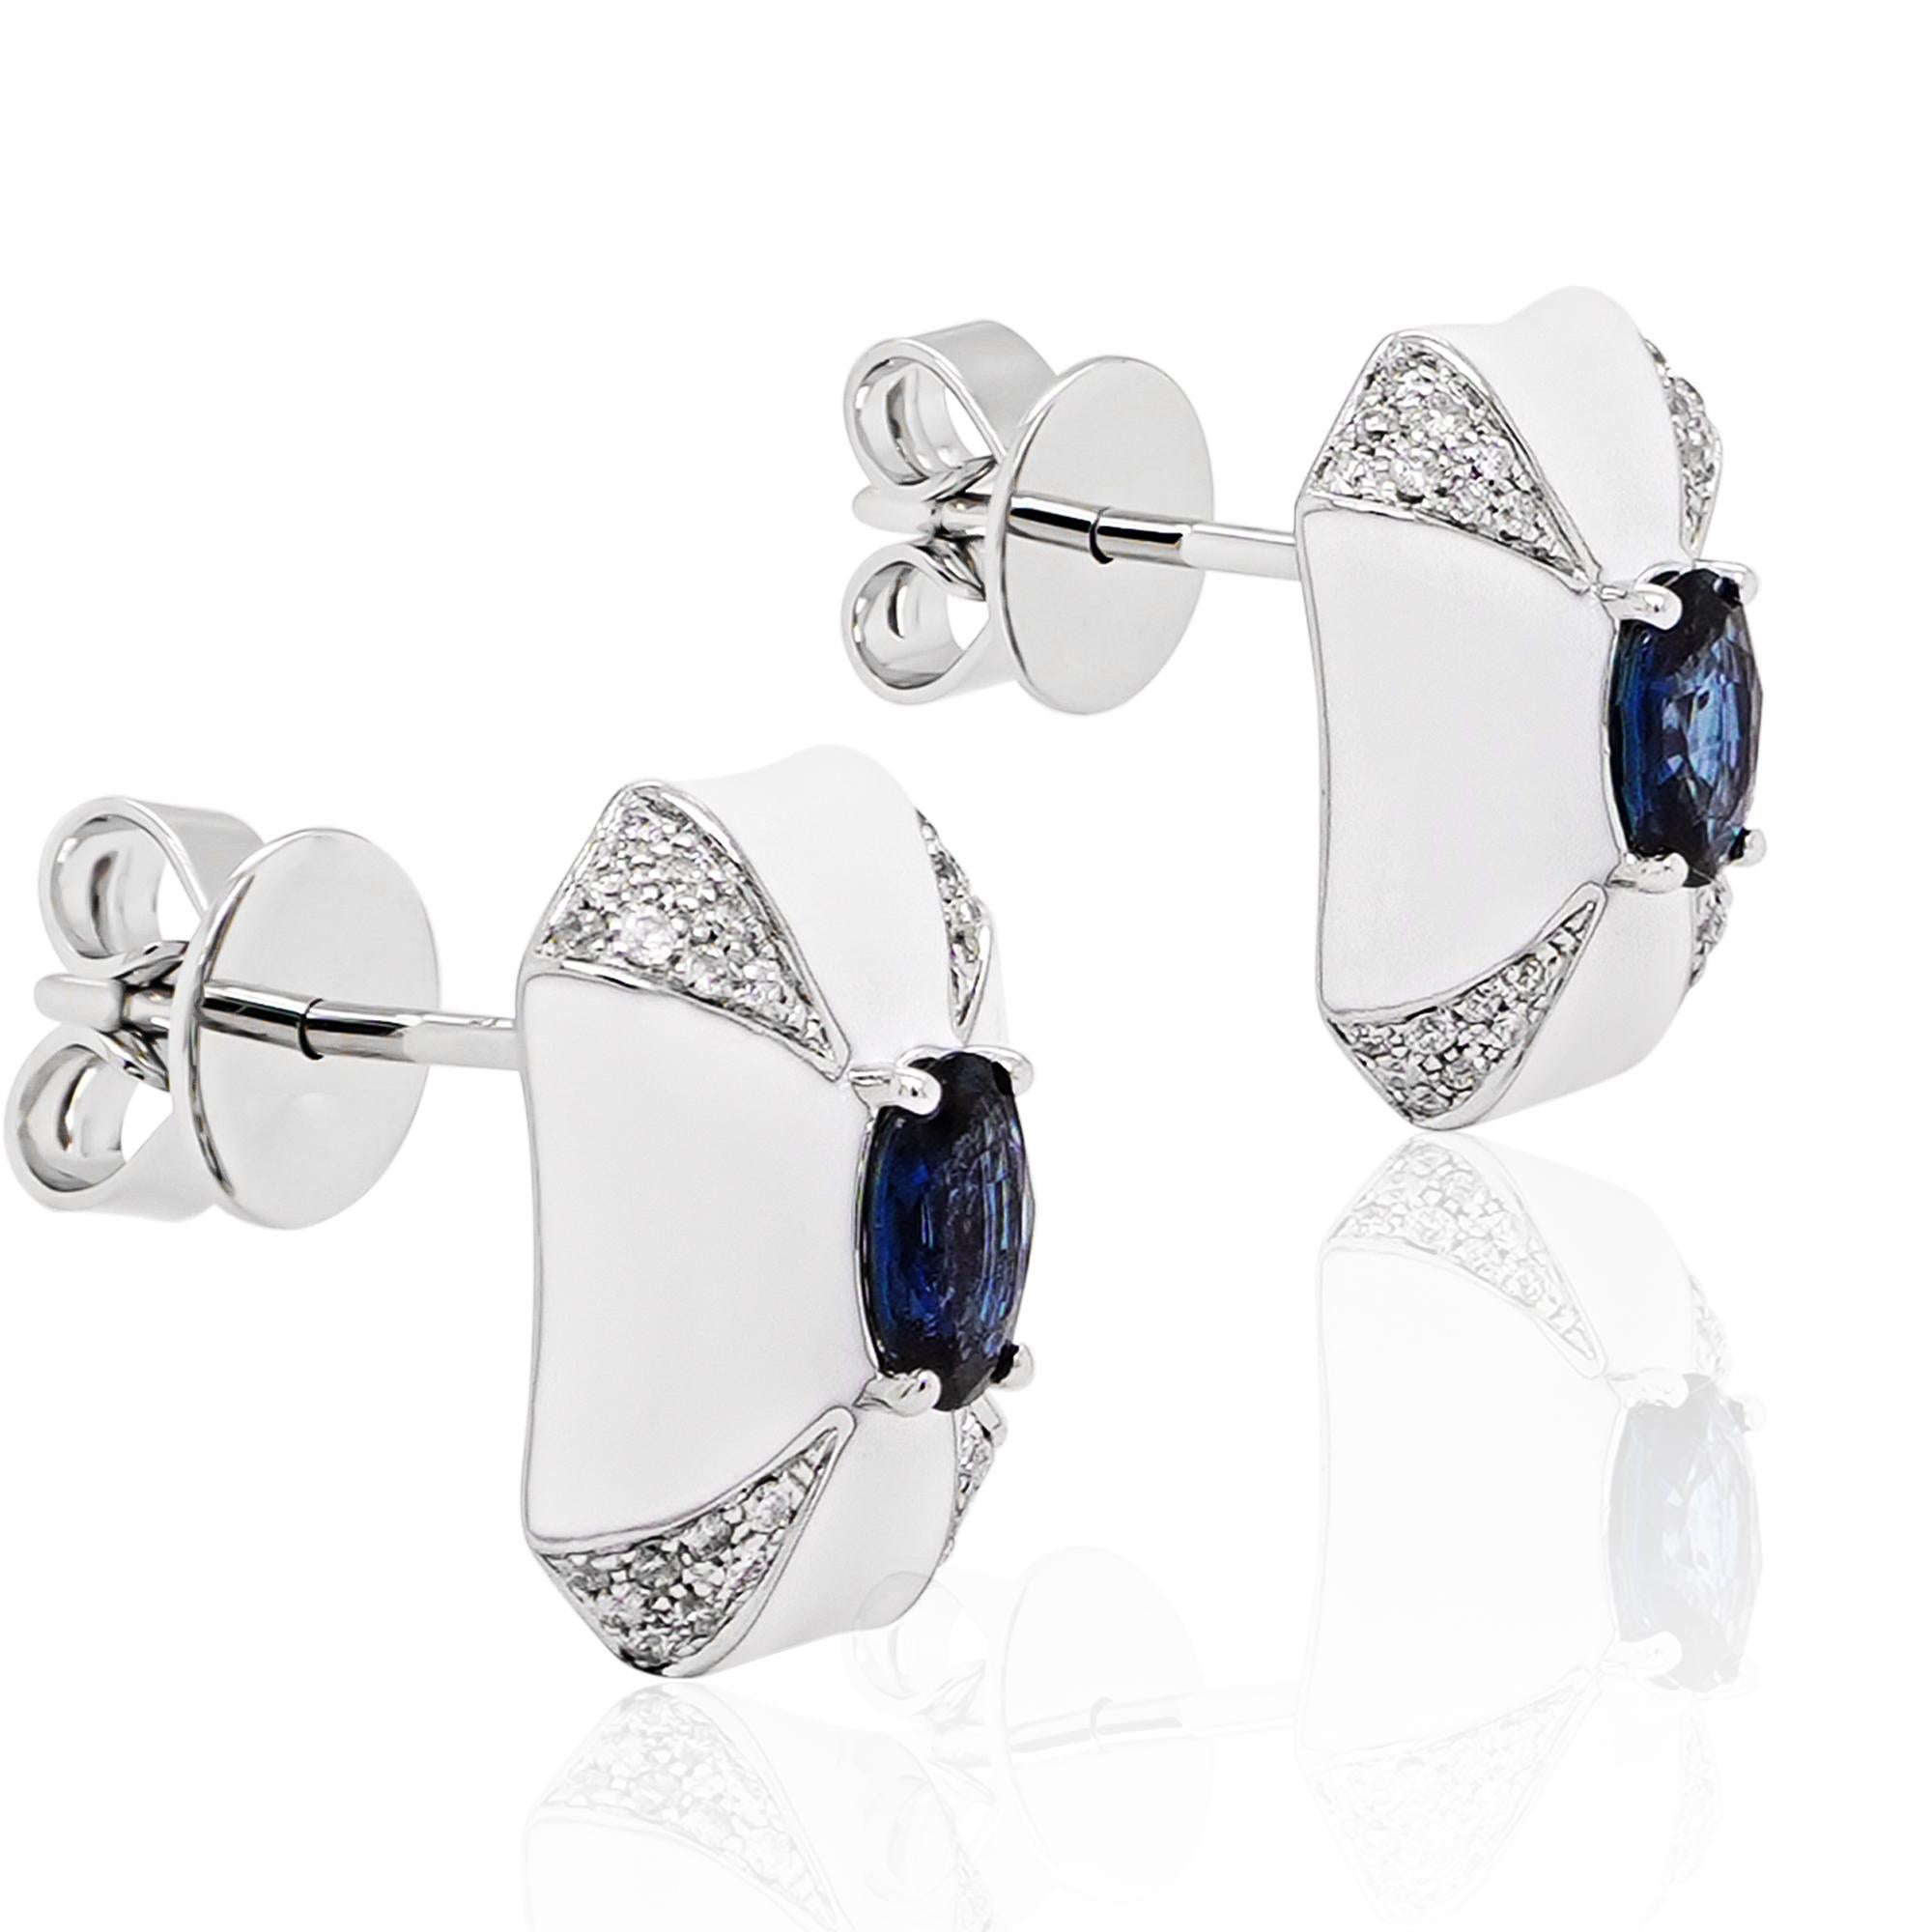 0.67 carat vivid blue sapphire are set with 0.17 carat of white round brilliant diamond set in 18K gold. The earring has been made with artic ice enamel which gives it a very edgy feel. The details of the diamond are mentioned below:

Color: